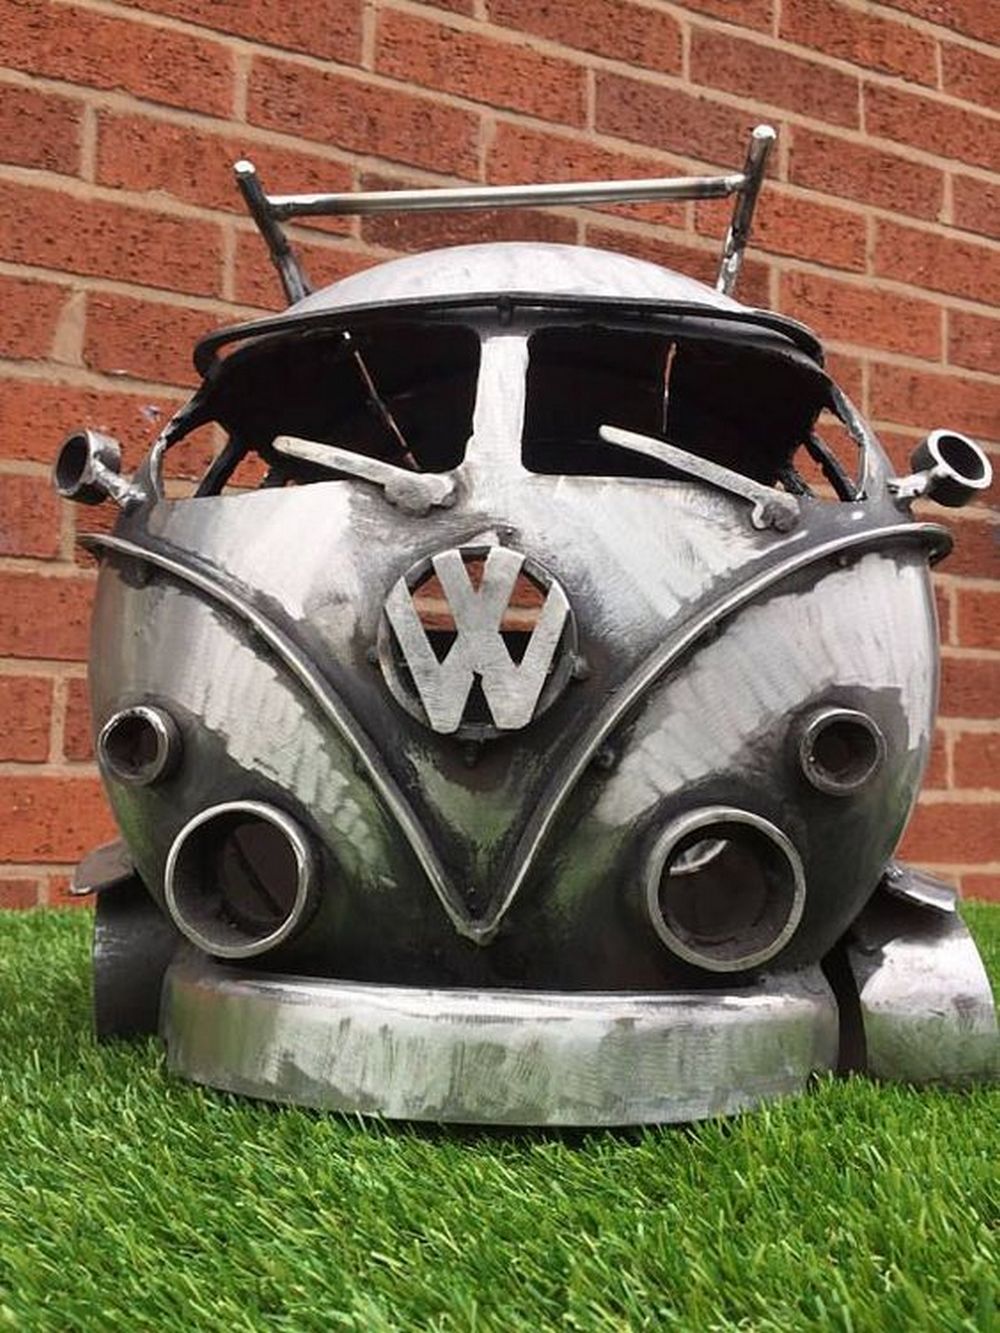 Propane Tank Into A Vw Bus Fire Pit, Fire Pit Made From Recycled Propane Tank